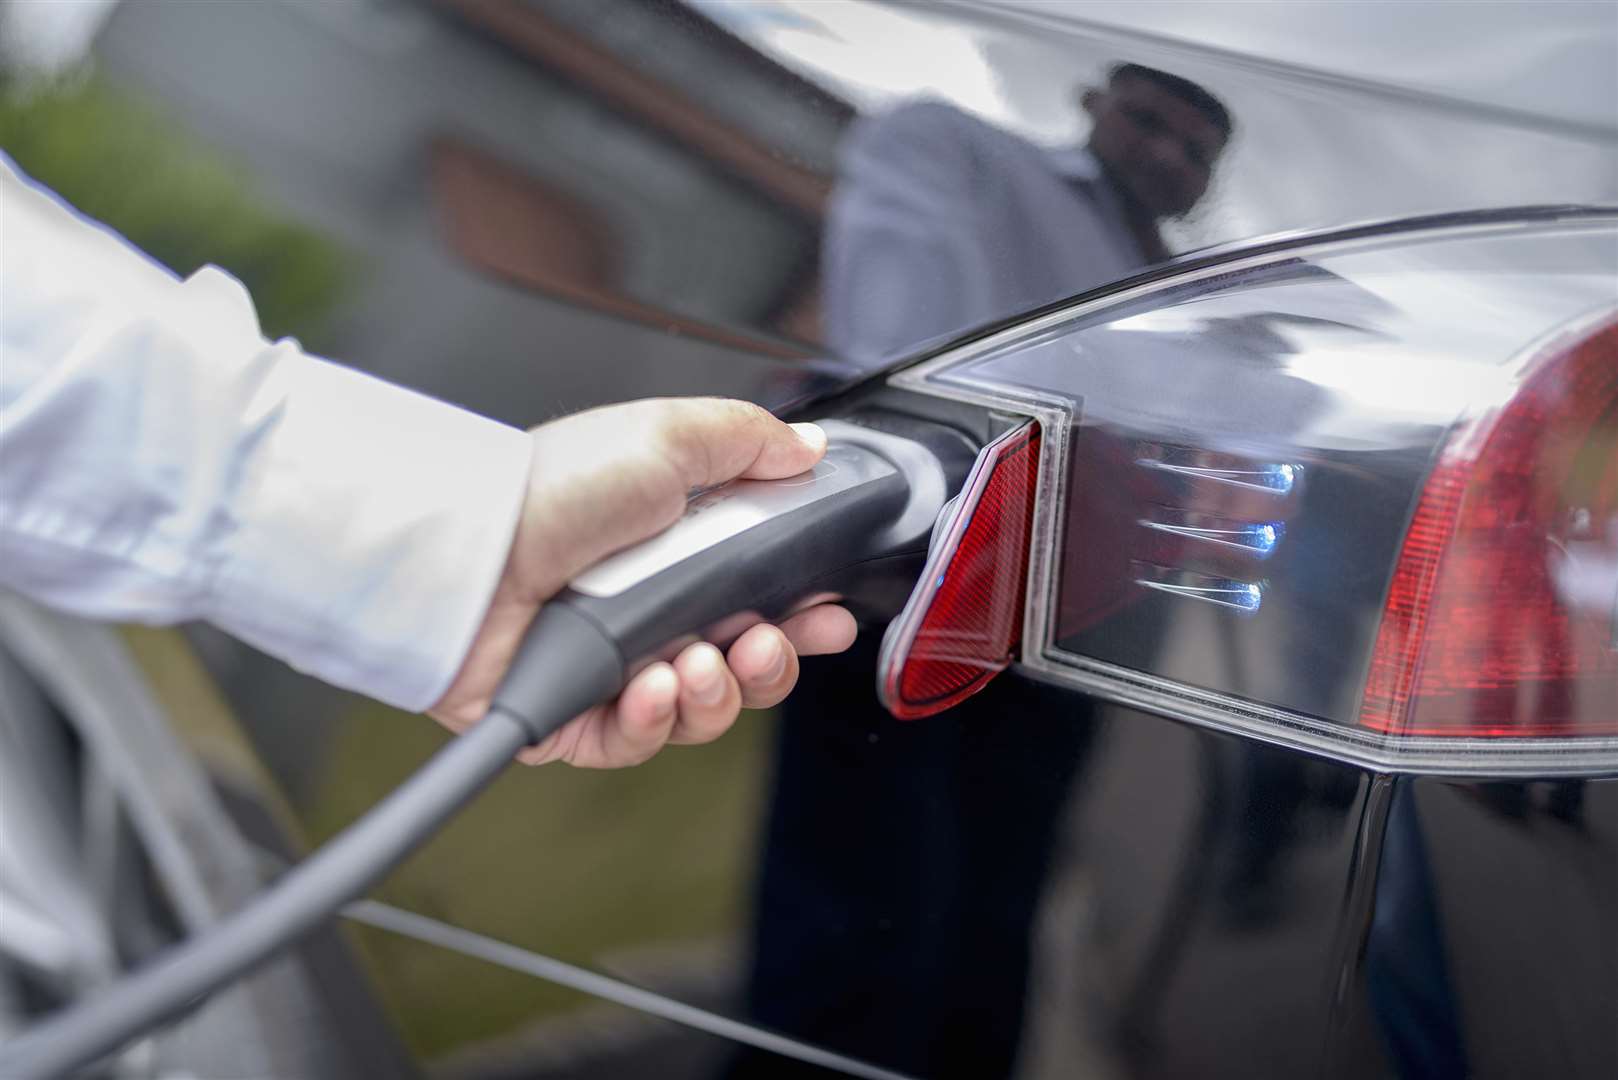 Despite its rural location, the NC500 is well served by electric vehicle charging facilities, according to Point Electrical's survey.